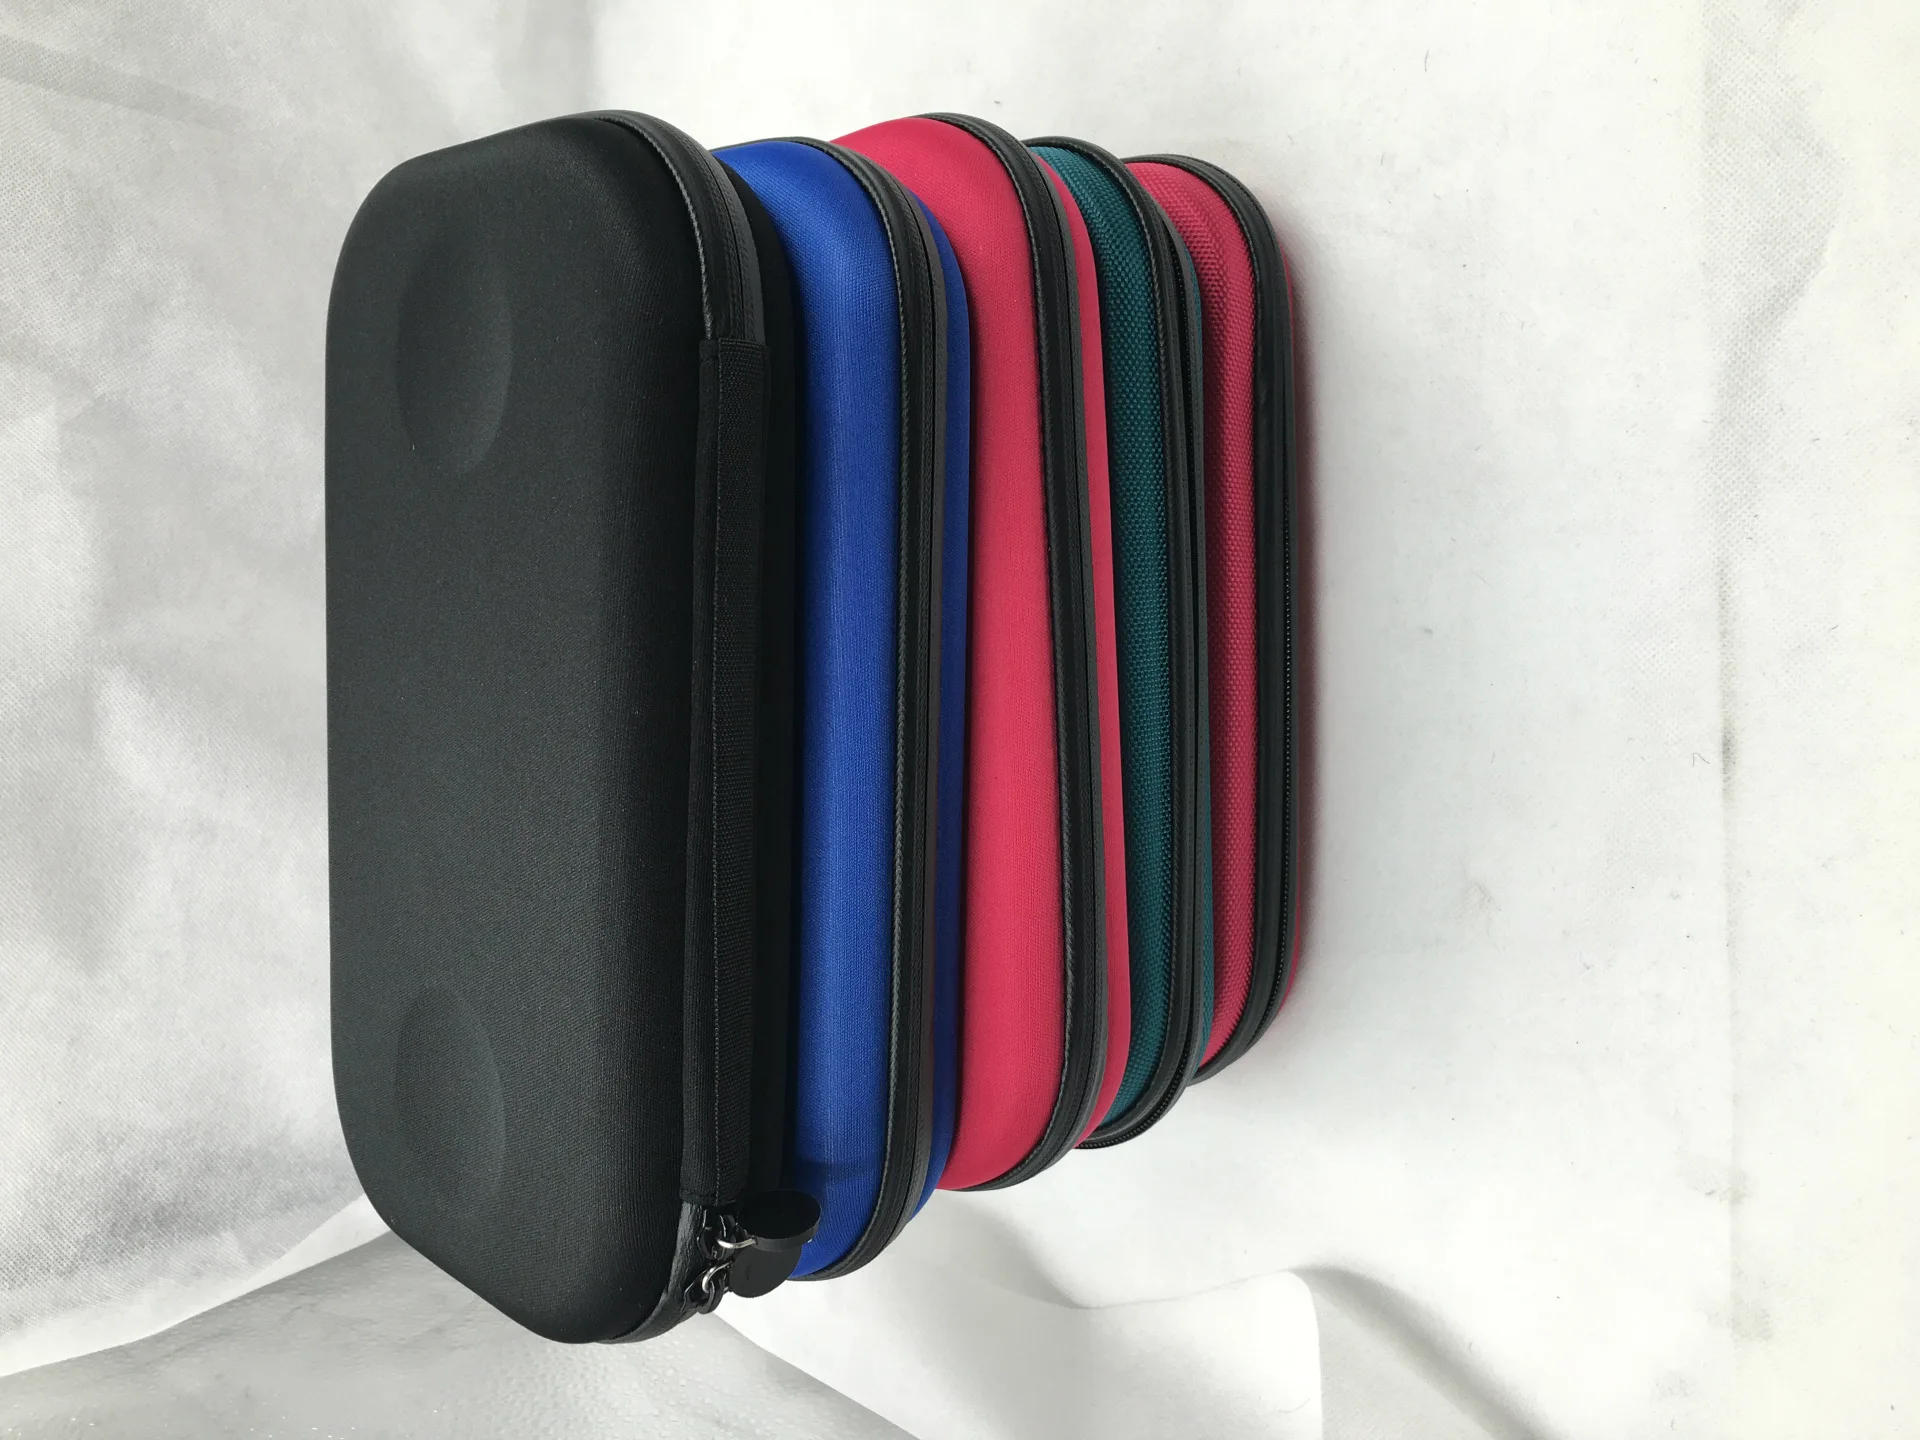 The most popular doctor's stethoscope box is easy to carry